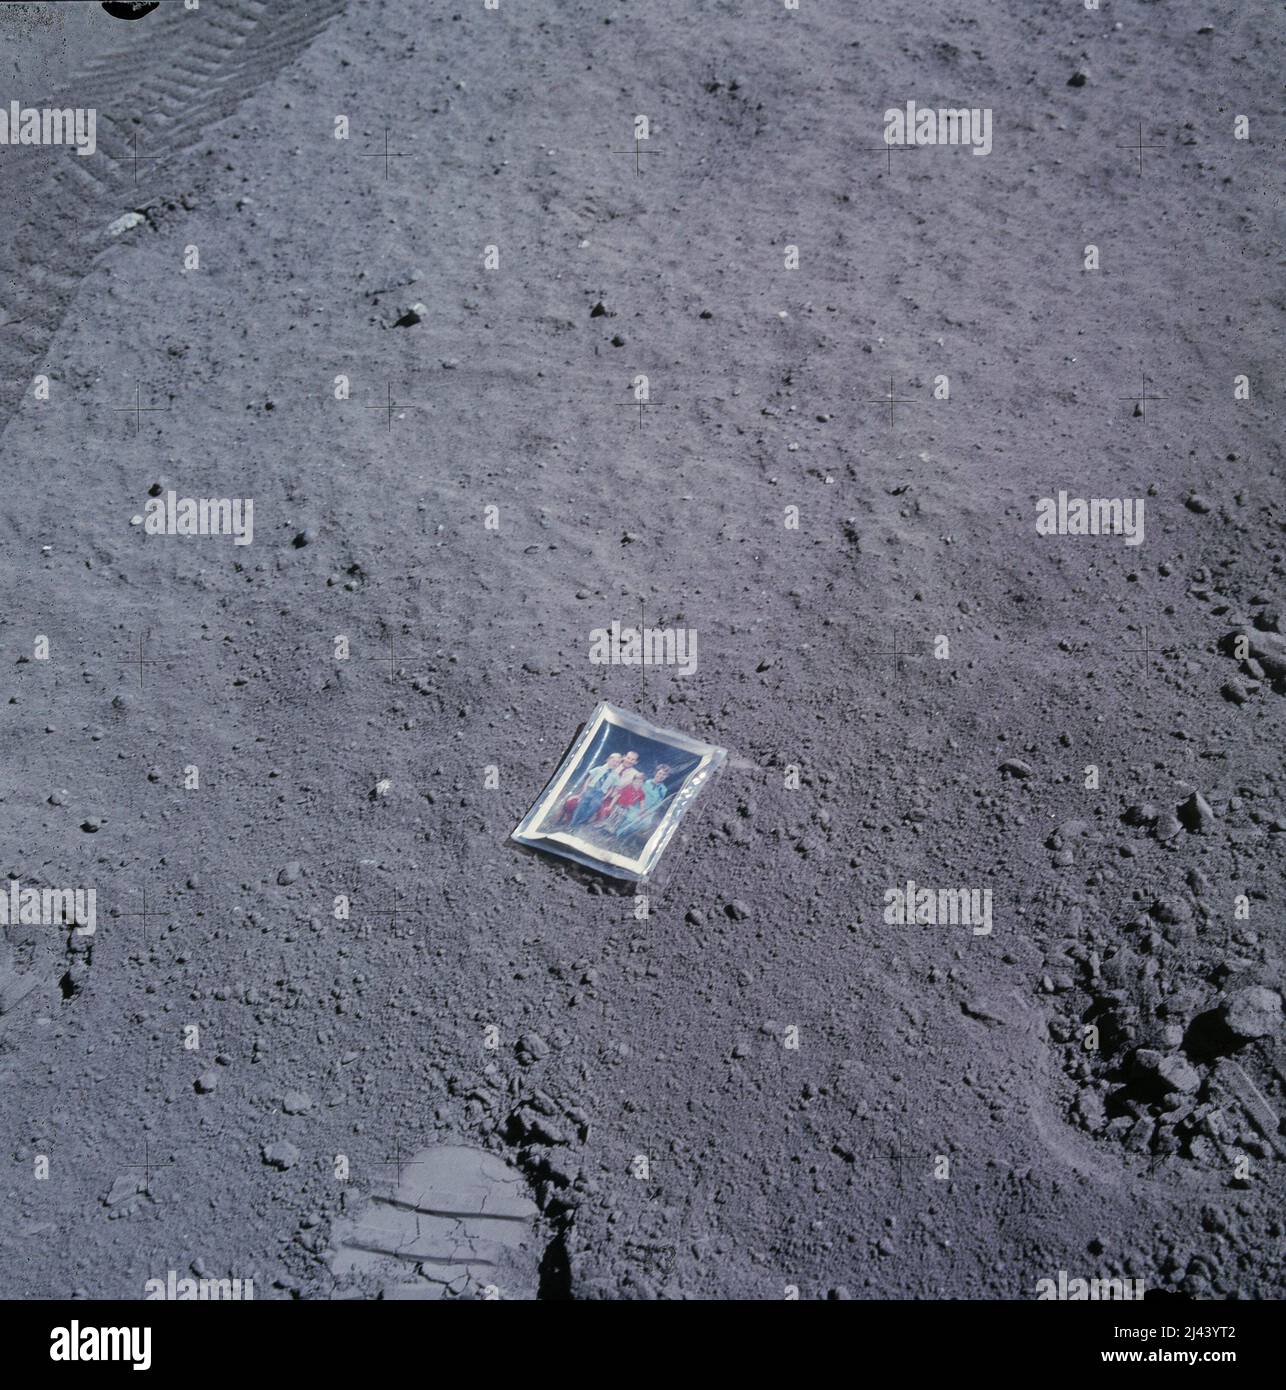 Astronaut Charlie Duke's family portrait left on the surface of the moon during teh Apollo 16 mission. Stock Photo